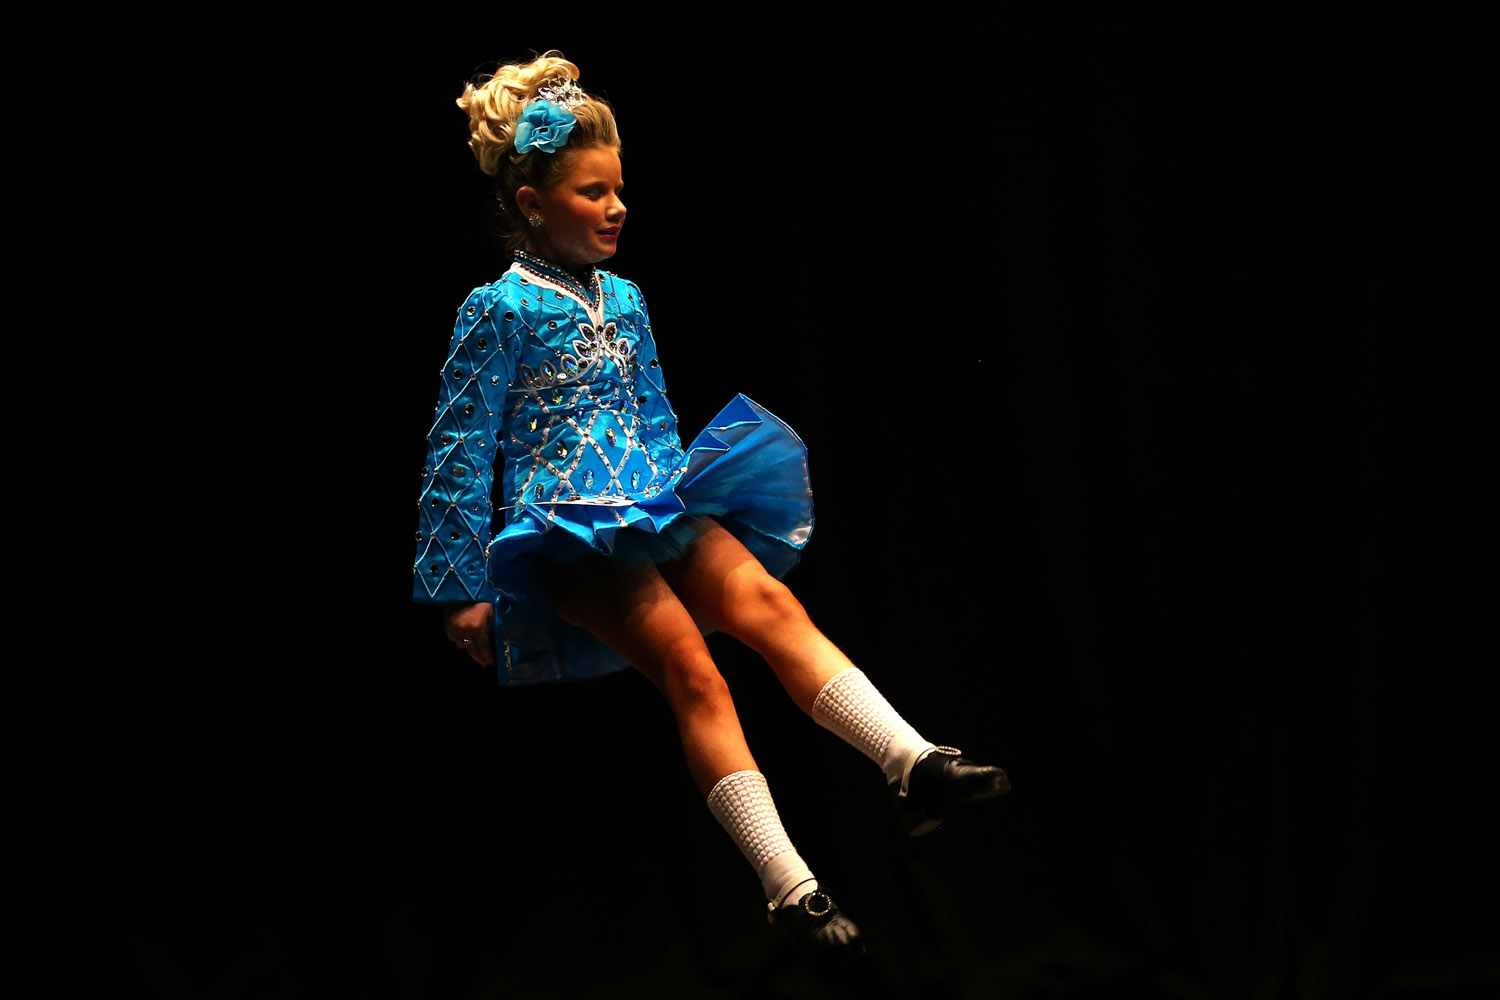 Feb. 22, 2013. Jessica Bushell from the Geraghty dance club in Ireland performs in the All Scotland Championships in Irish Dancing, being held at the Royal Concert Hall in Glasgow, Ireland.